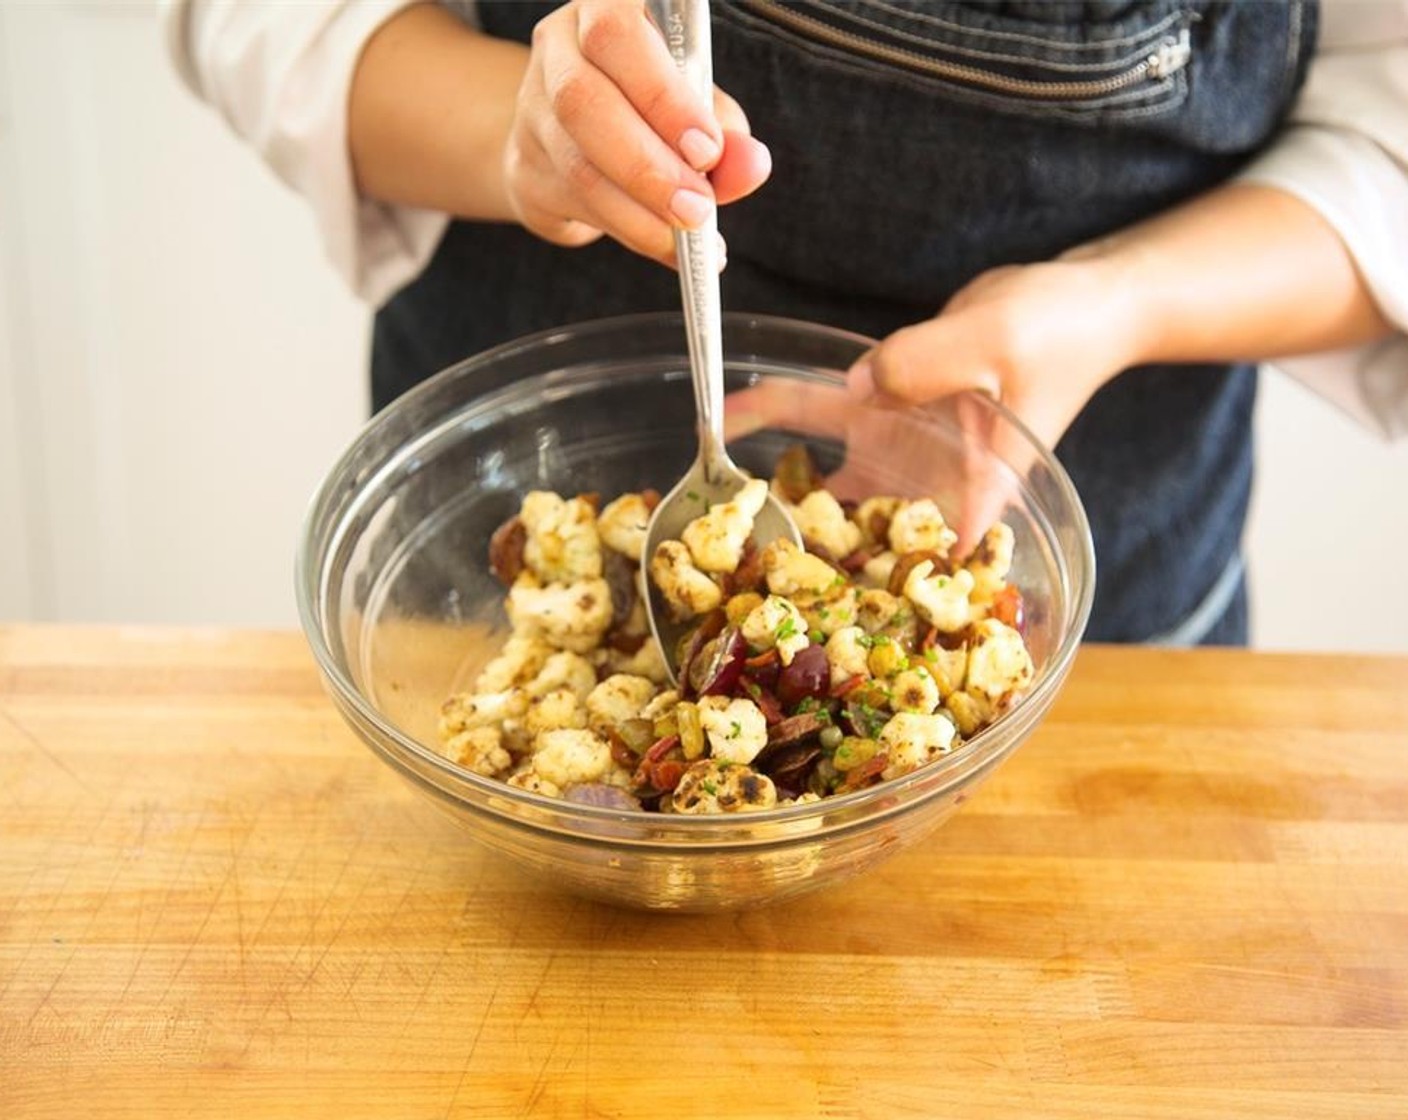 step 17 Place the cauliflower, celery, bacon, and potatoes in a large bowl with raisins and grapes. Add Capers (1 Tbsp) and half of the chopped chives. Season with Salt (1/2 tsp), Ground Black Pepper (1/4 tsp) and Olive Oil (1 Tbsp). Toss gently.